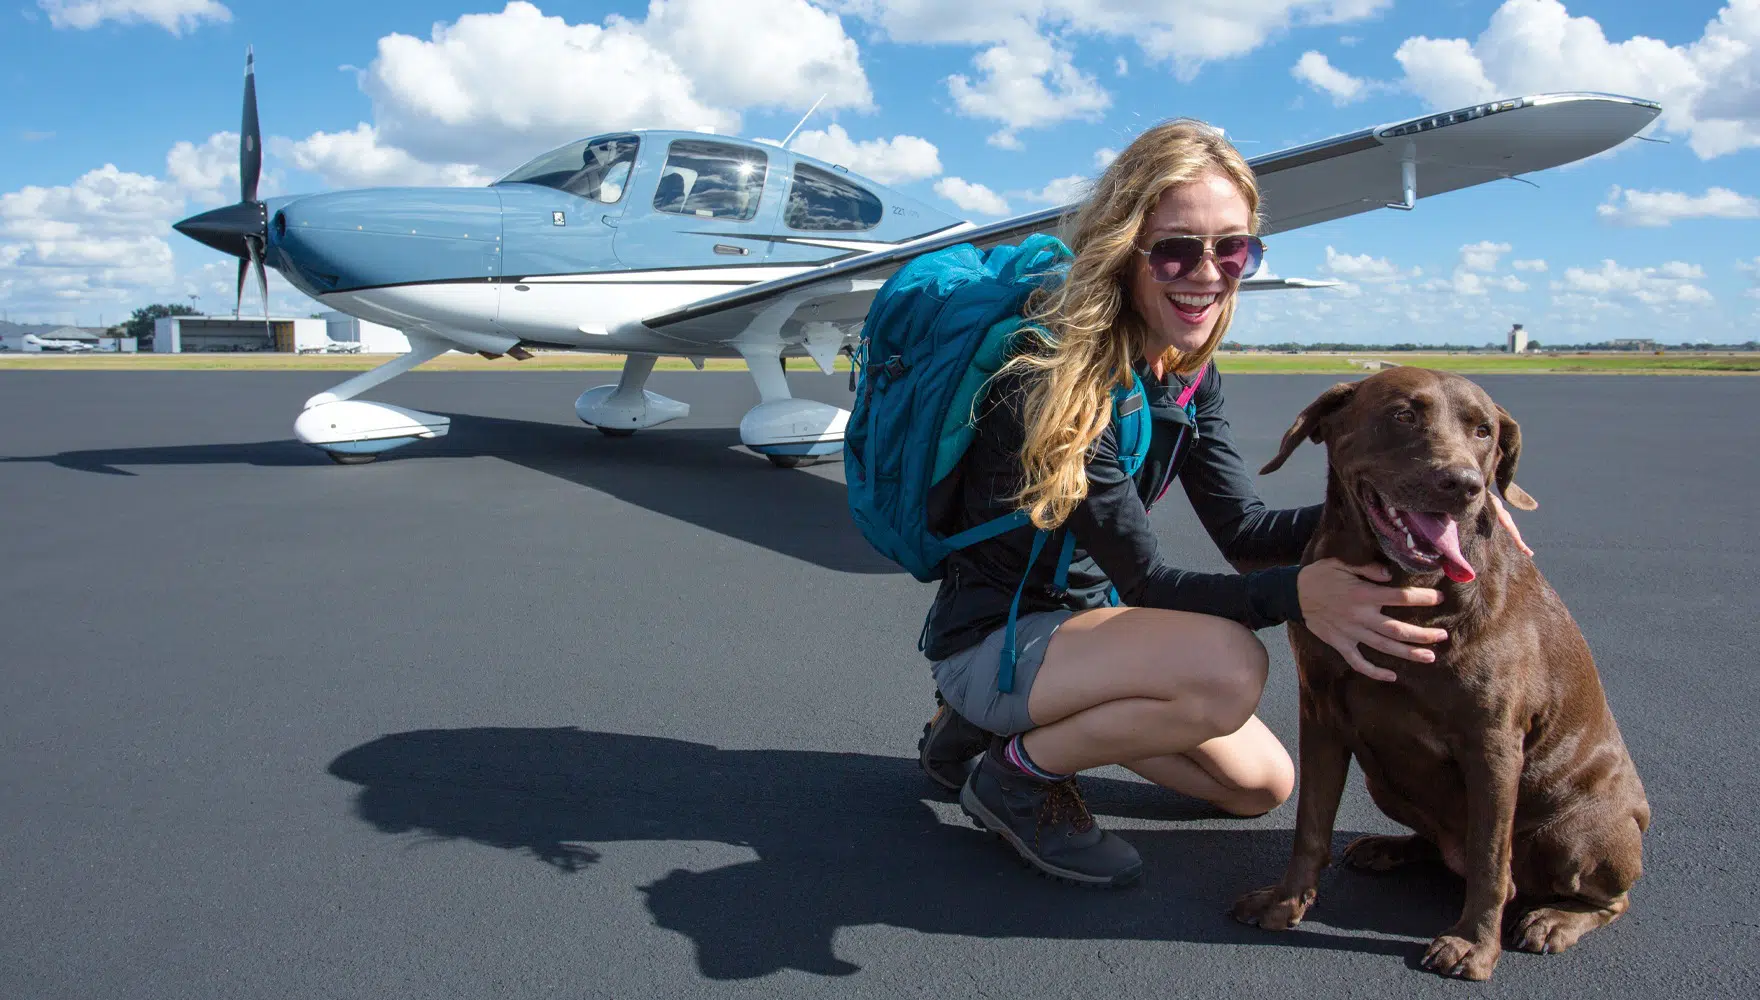 Our Top Tips for Flying with Your Dog